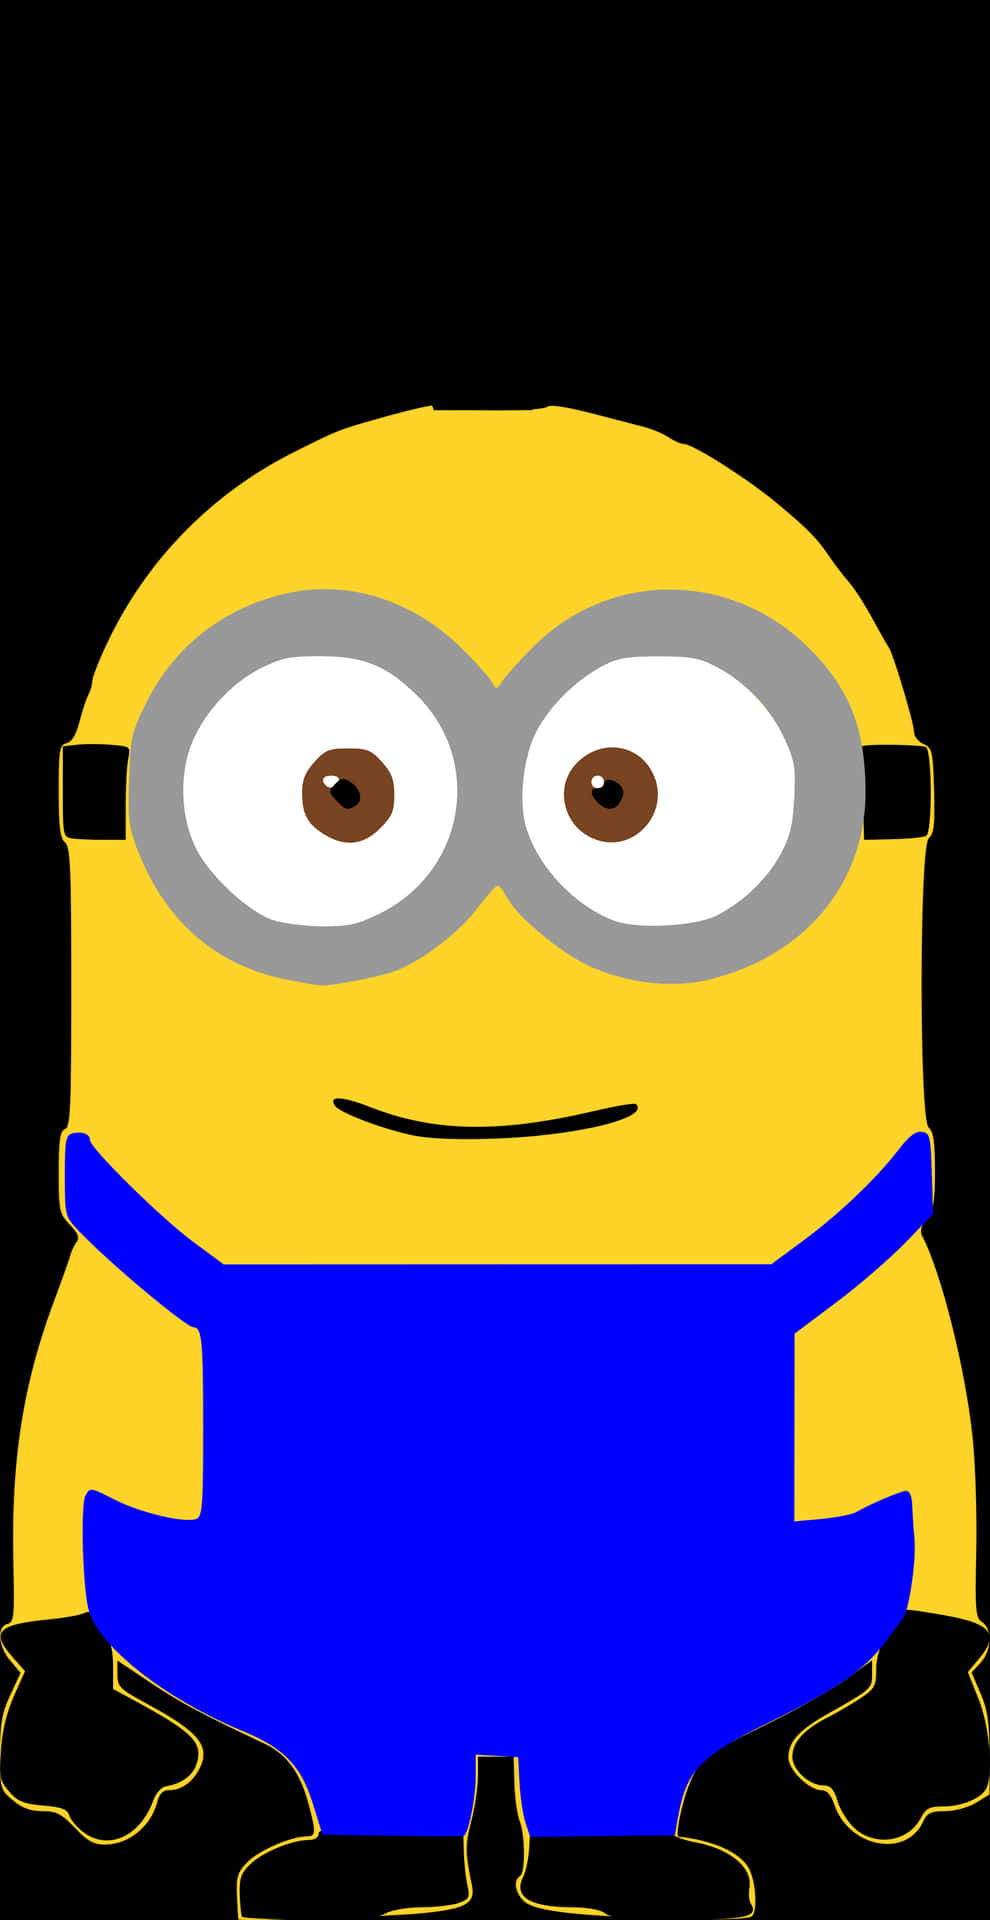 Minion_ Character_ Illustration PNG